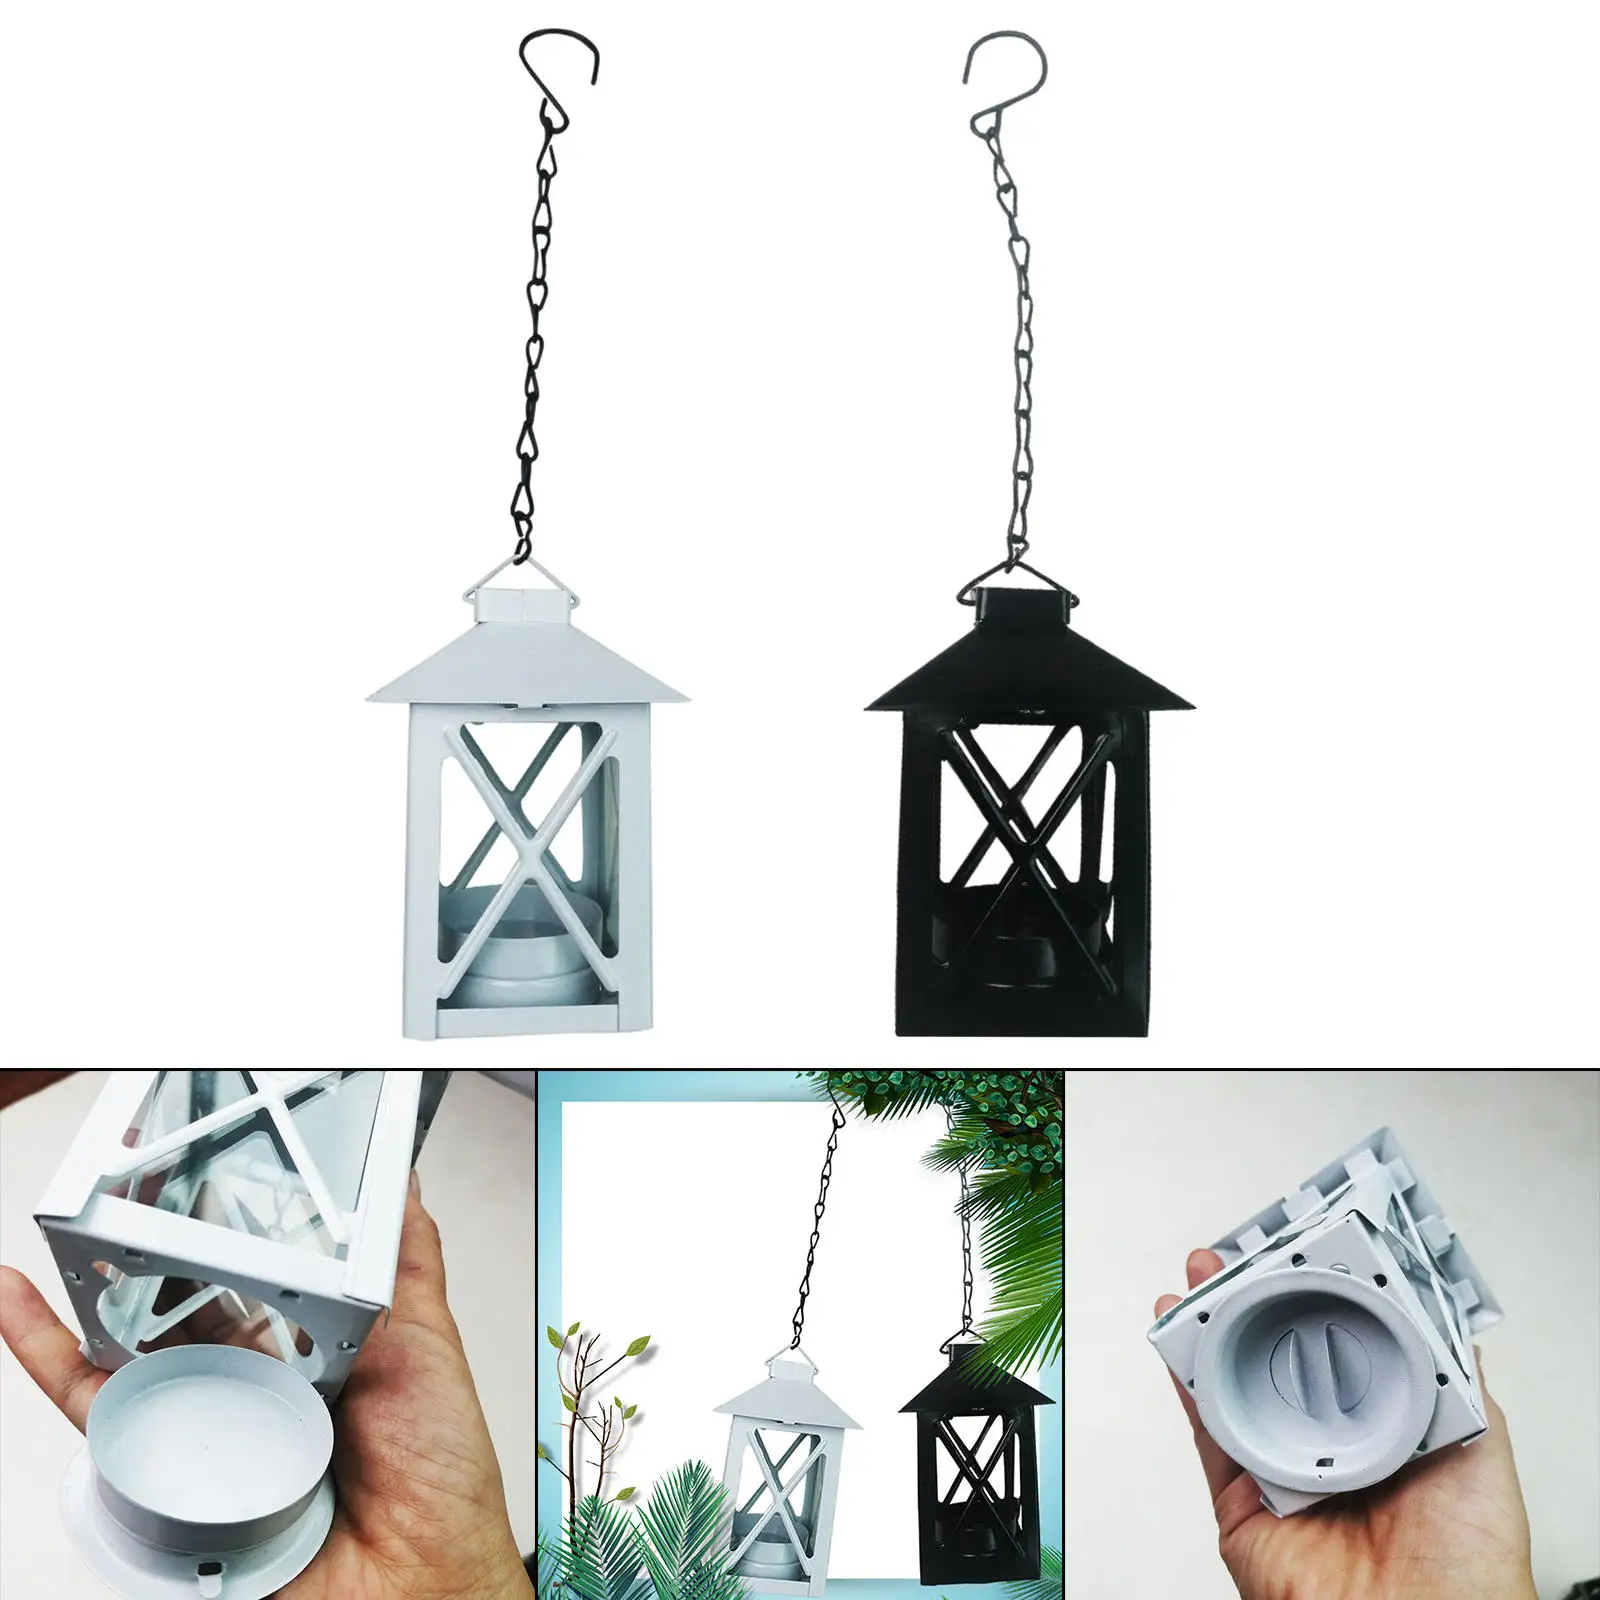 Retro Decorative Candle Lantern Hanging Tea Light Holder Rust-Proof for Votive Candle Indoor Outdoor Wedding Events Holiday